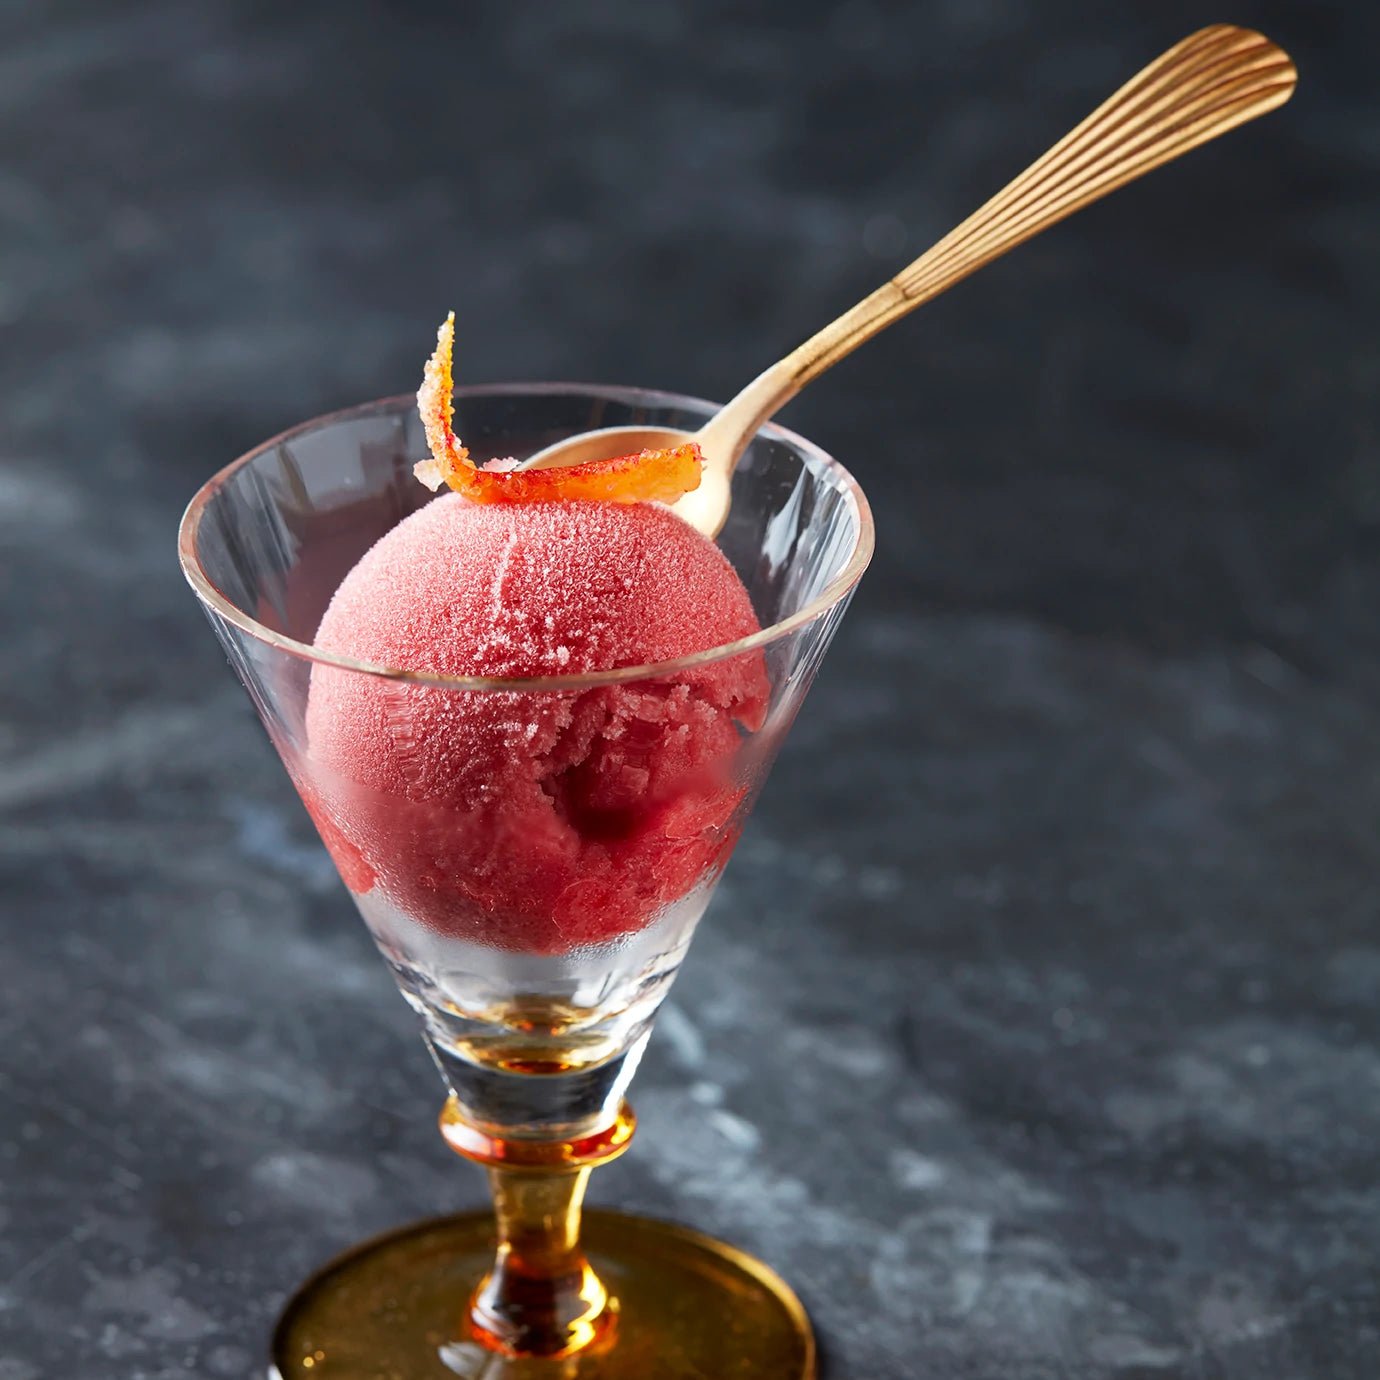 Scoop of Blood Orange & Campari sorbet in a glass with a golden spoon